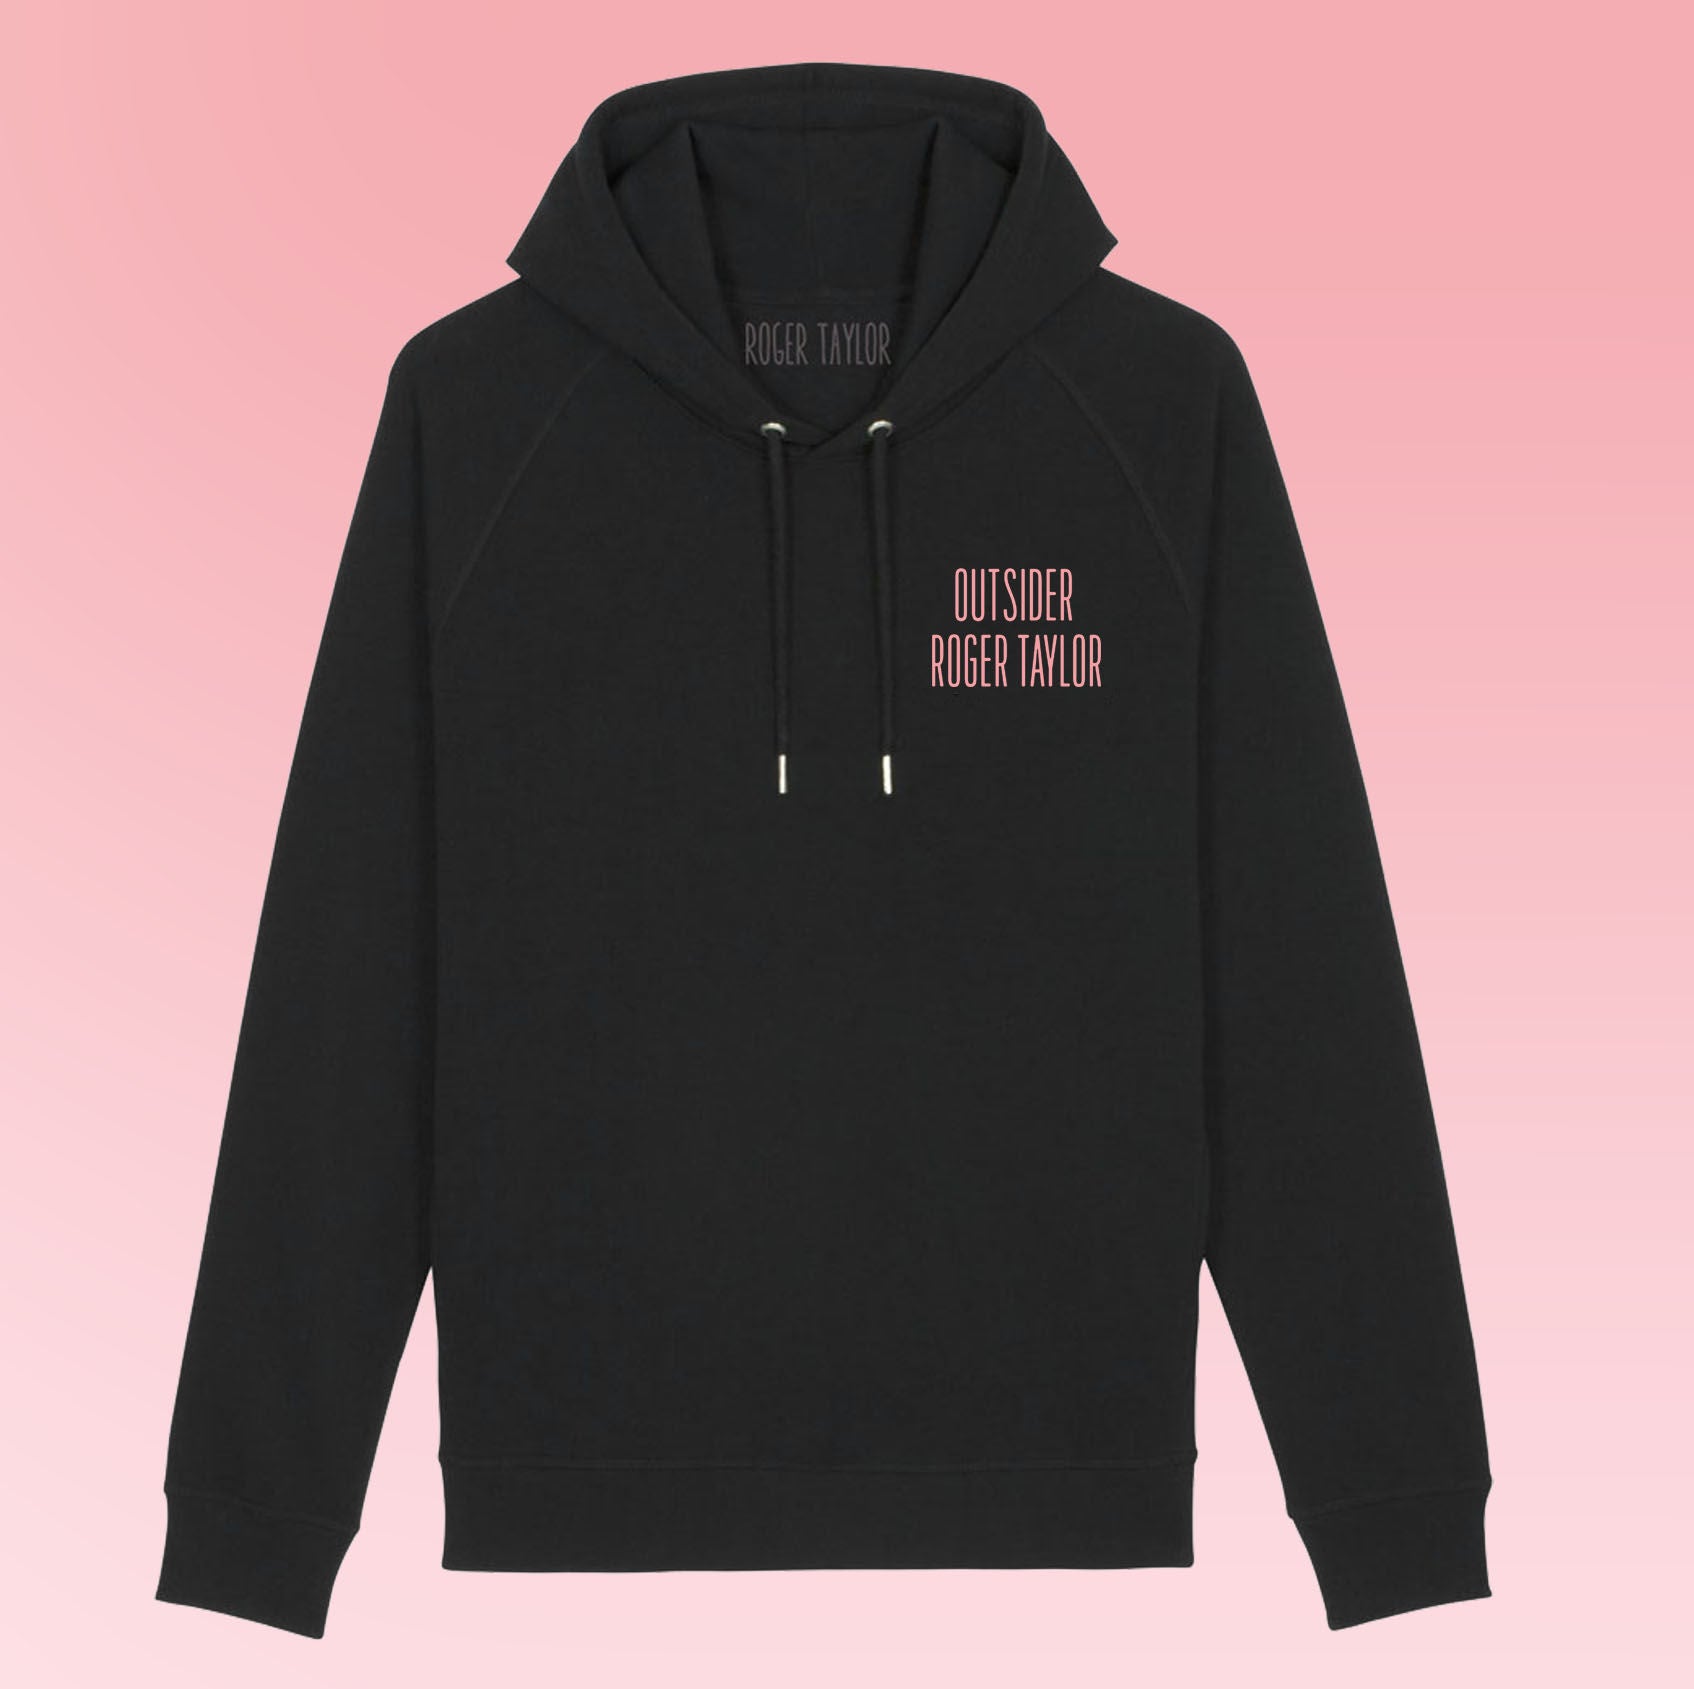 Roger Taylor - Outsider Hoodie